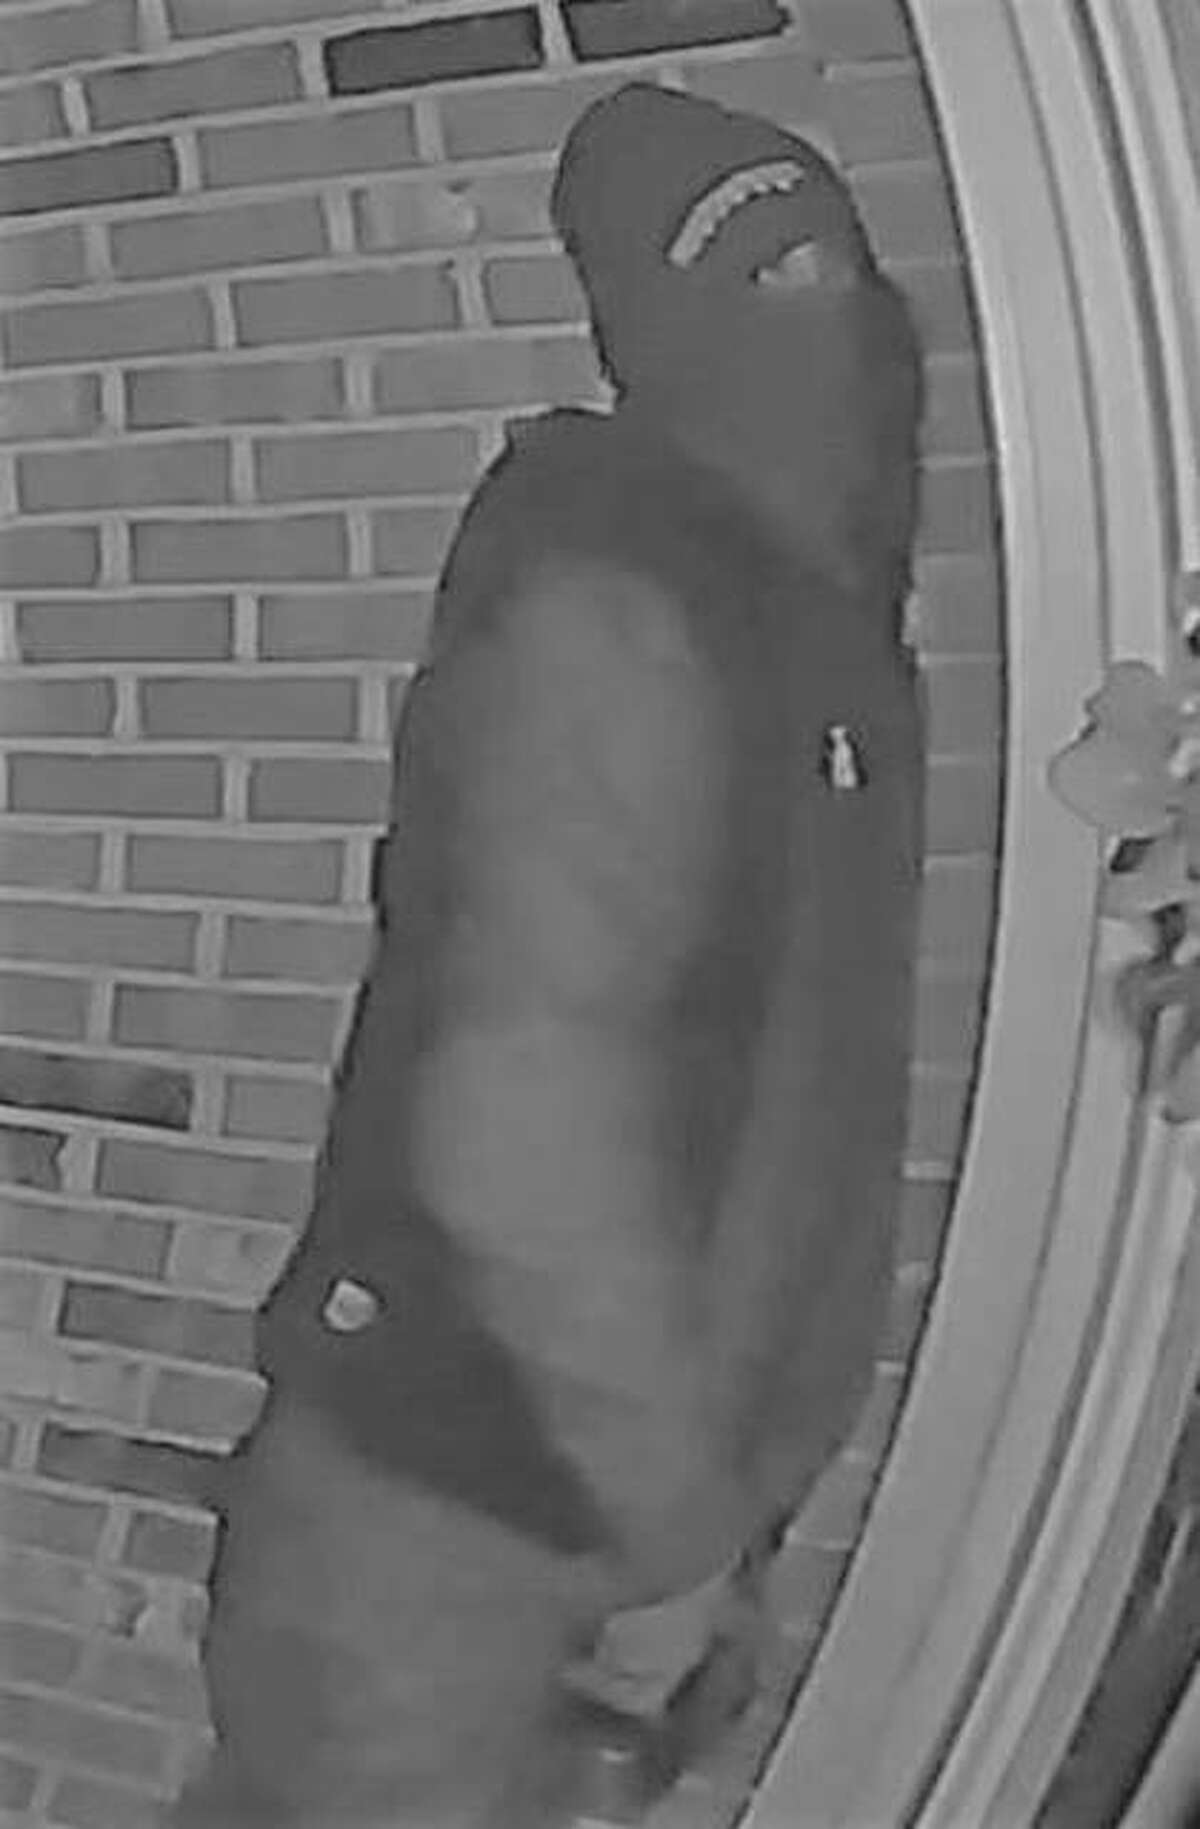 Glen Carbon Police are seeking help in identifying a suspect wanted in connection to three residential burglaries over the Oct. 9 weekend.